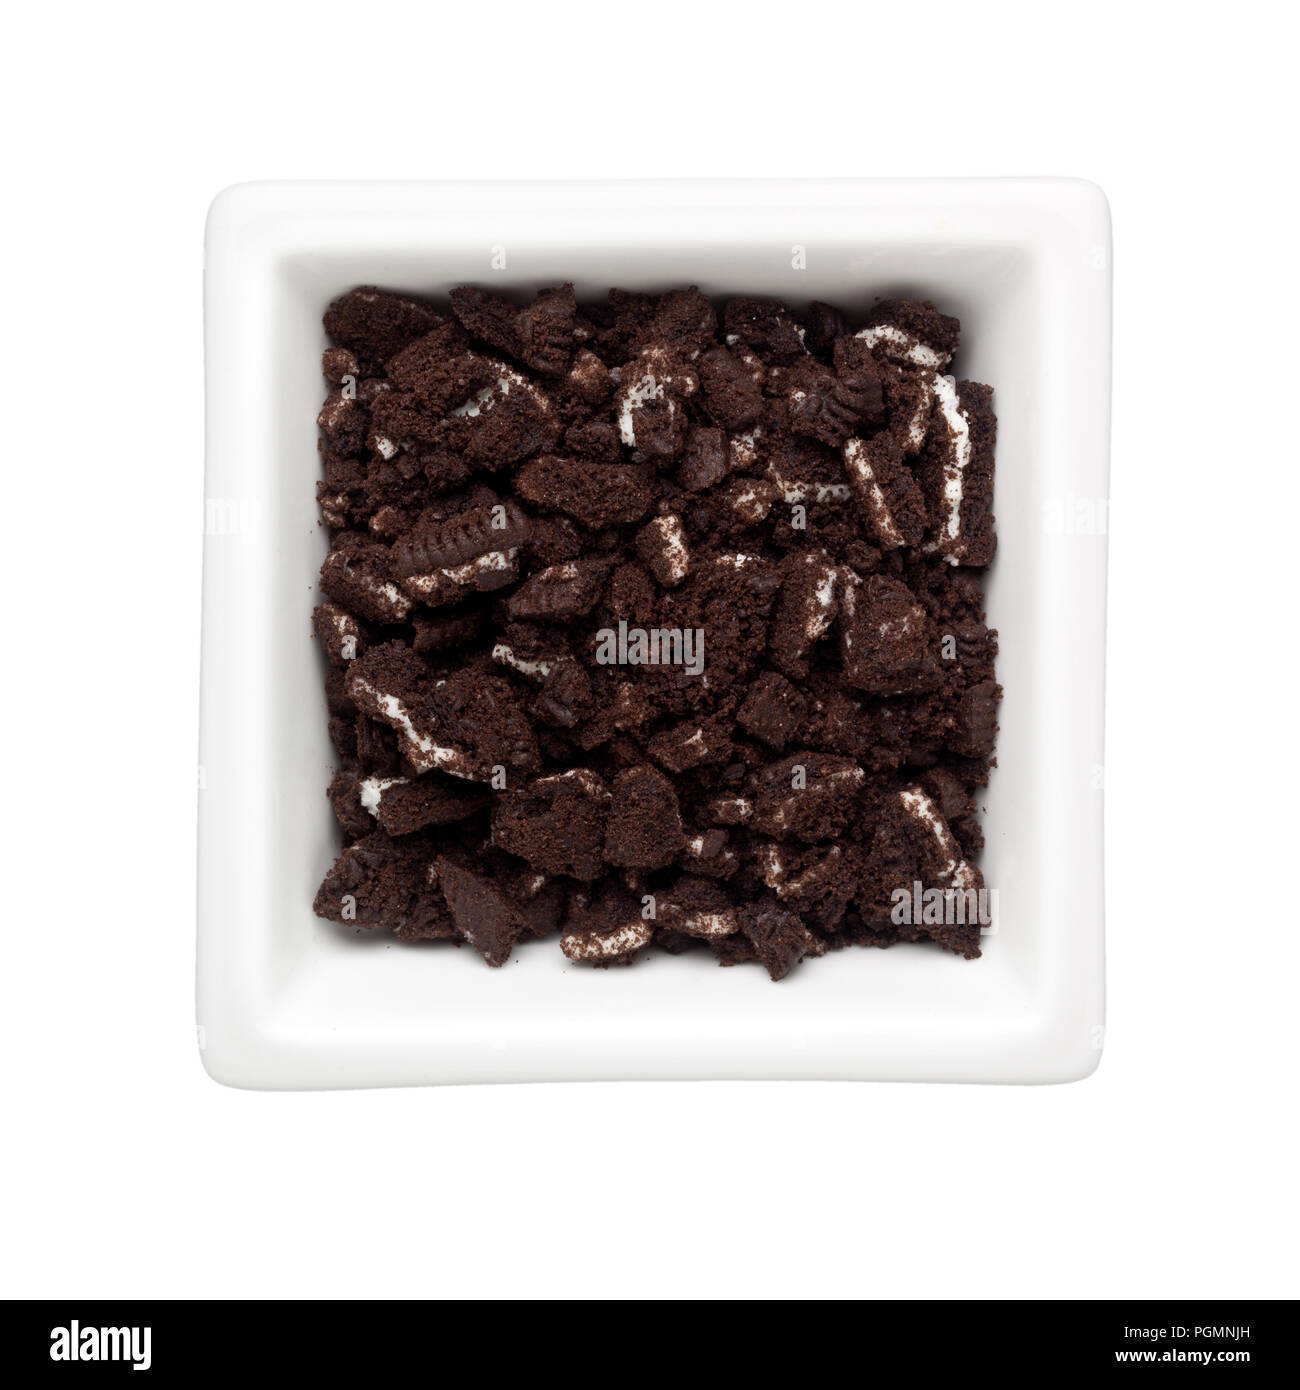 Crumbled oreo biscuit in a square bowl isolated on white background; Stock Photo